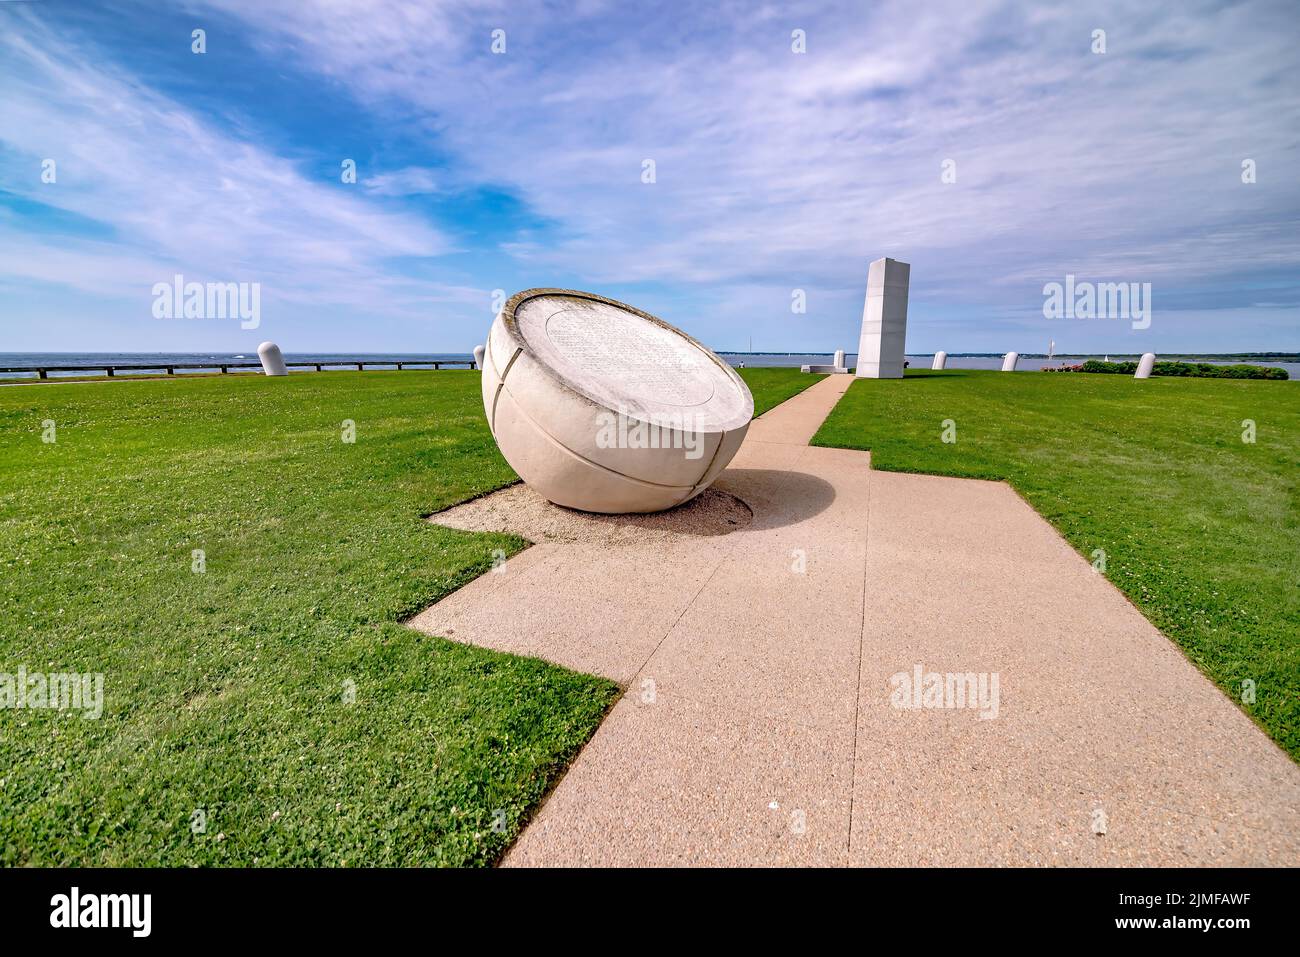 Newport rhode island - portugese discovery monument Stock Photo